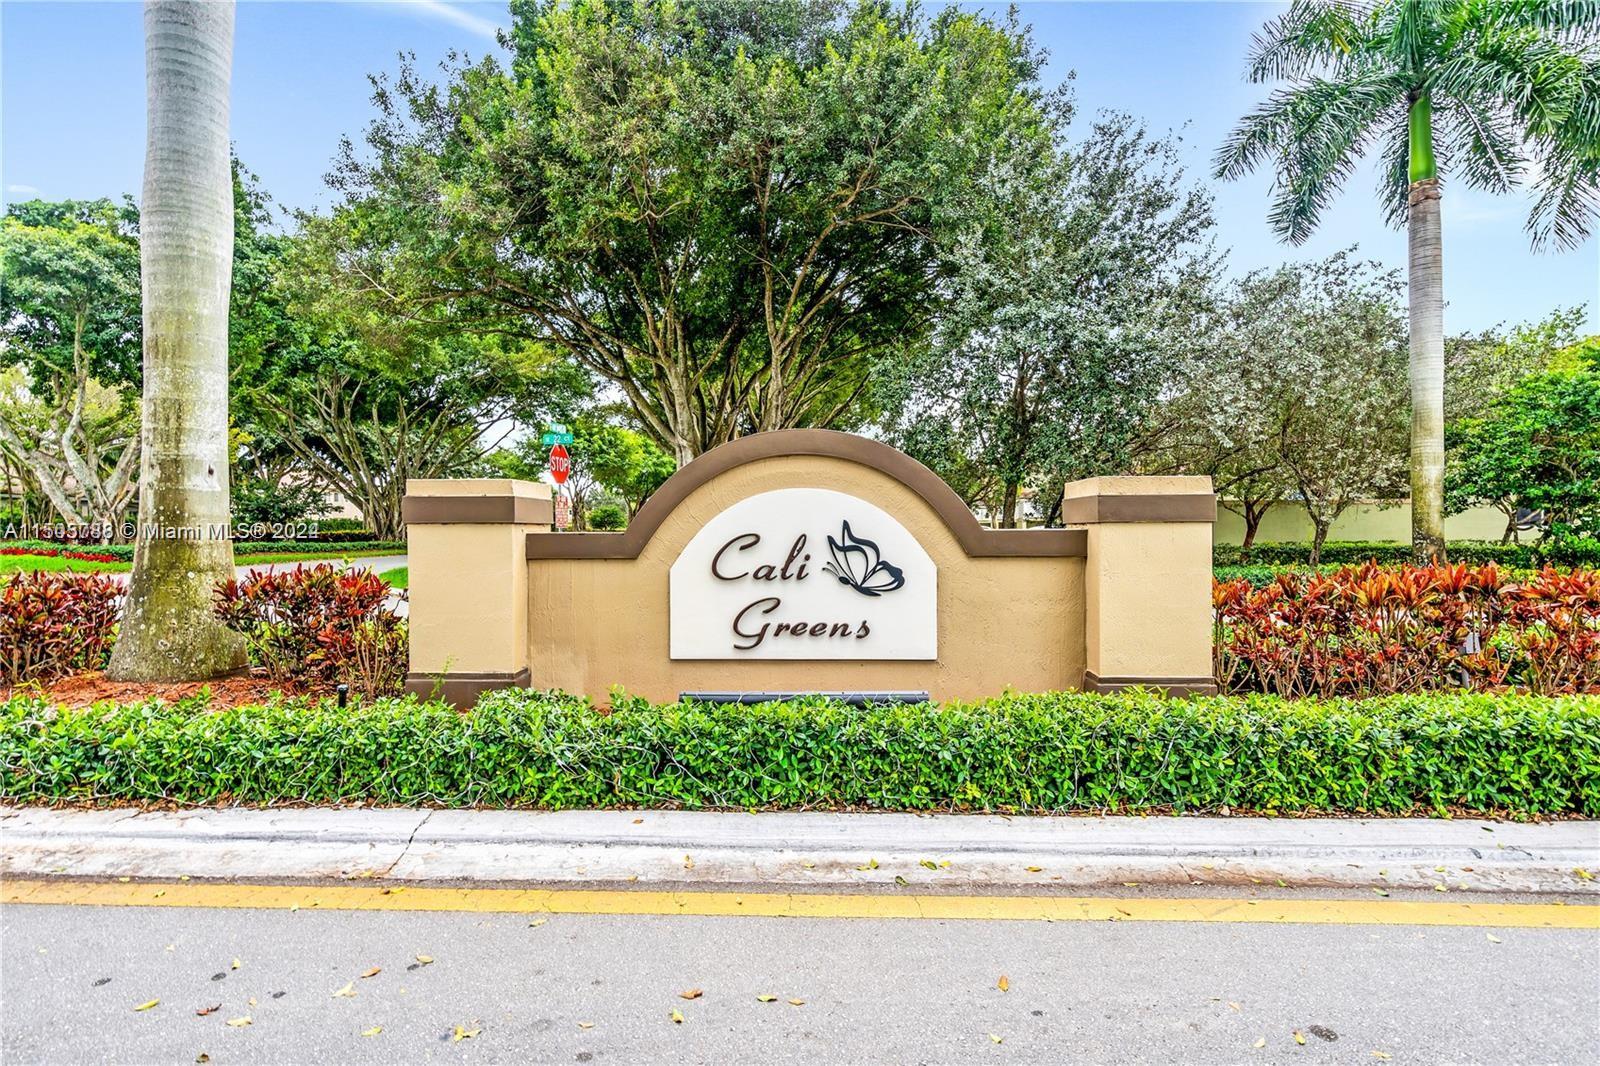 Great 3/2.5 townhome with two car garage and fenced in backyard located in the very desirable gated community of Cali Greens at Keys Gate. Community includes AT&T Uverse cable tv and internet, community pool, bbq area, 24 hour roving security, tennis courts, alarm monitoring and gated entrance.